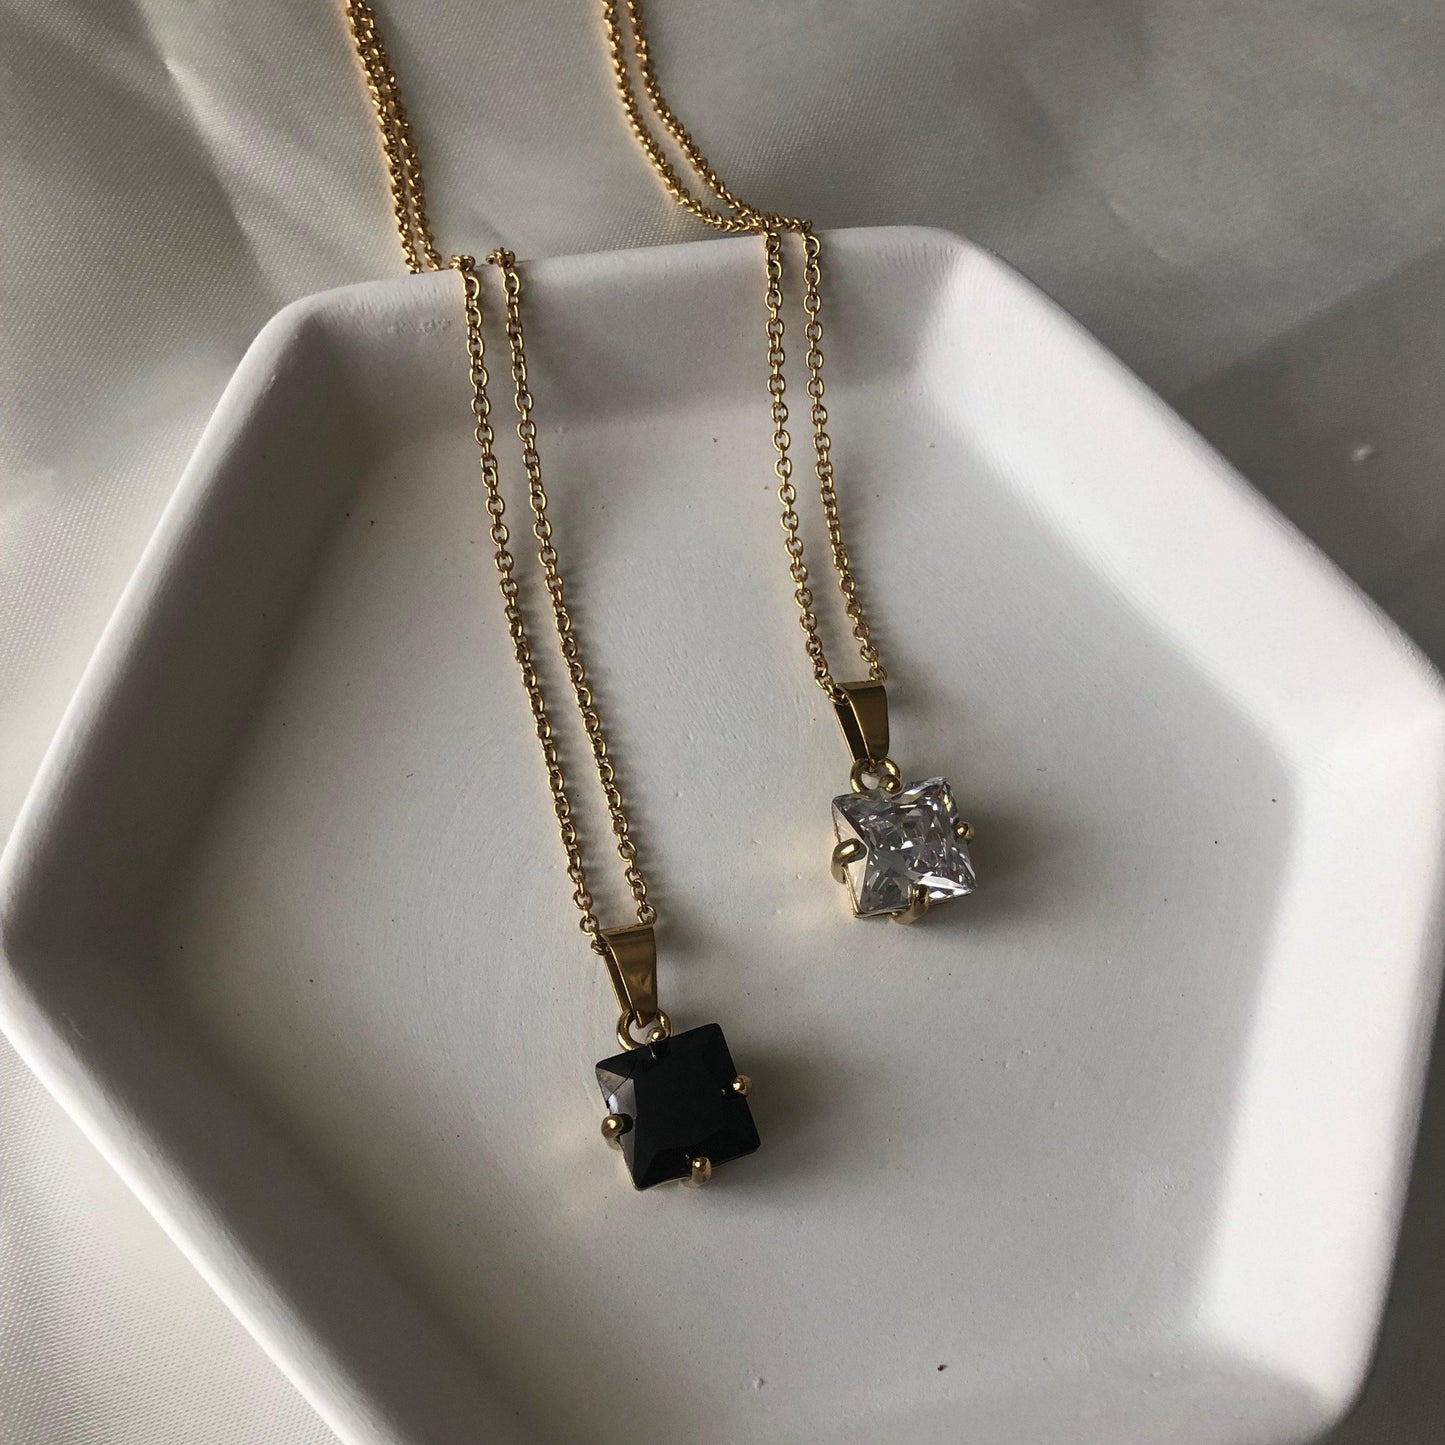 Gemma Necklace - Black | Pendant Necklace - JESSA JEWELRY | GOLD JEWELRY; dainty, affordable gold everyday jewelry. Tarnish free, water-resistant, hypoallergenic. Jewelry for everyday wear